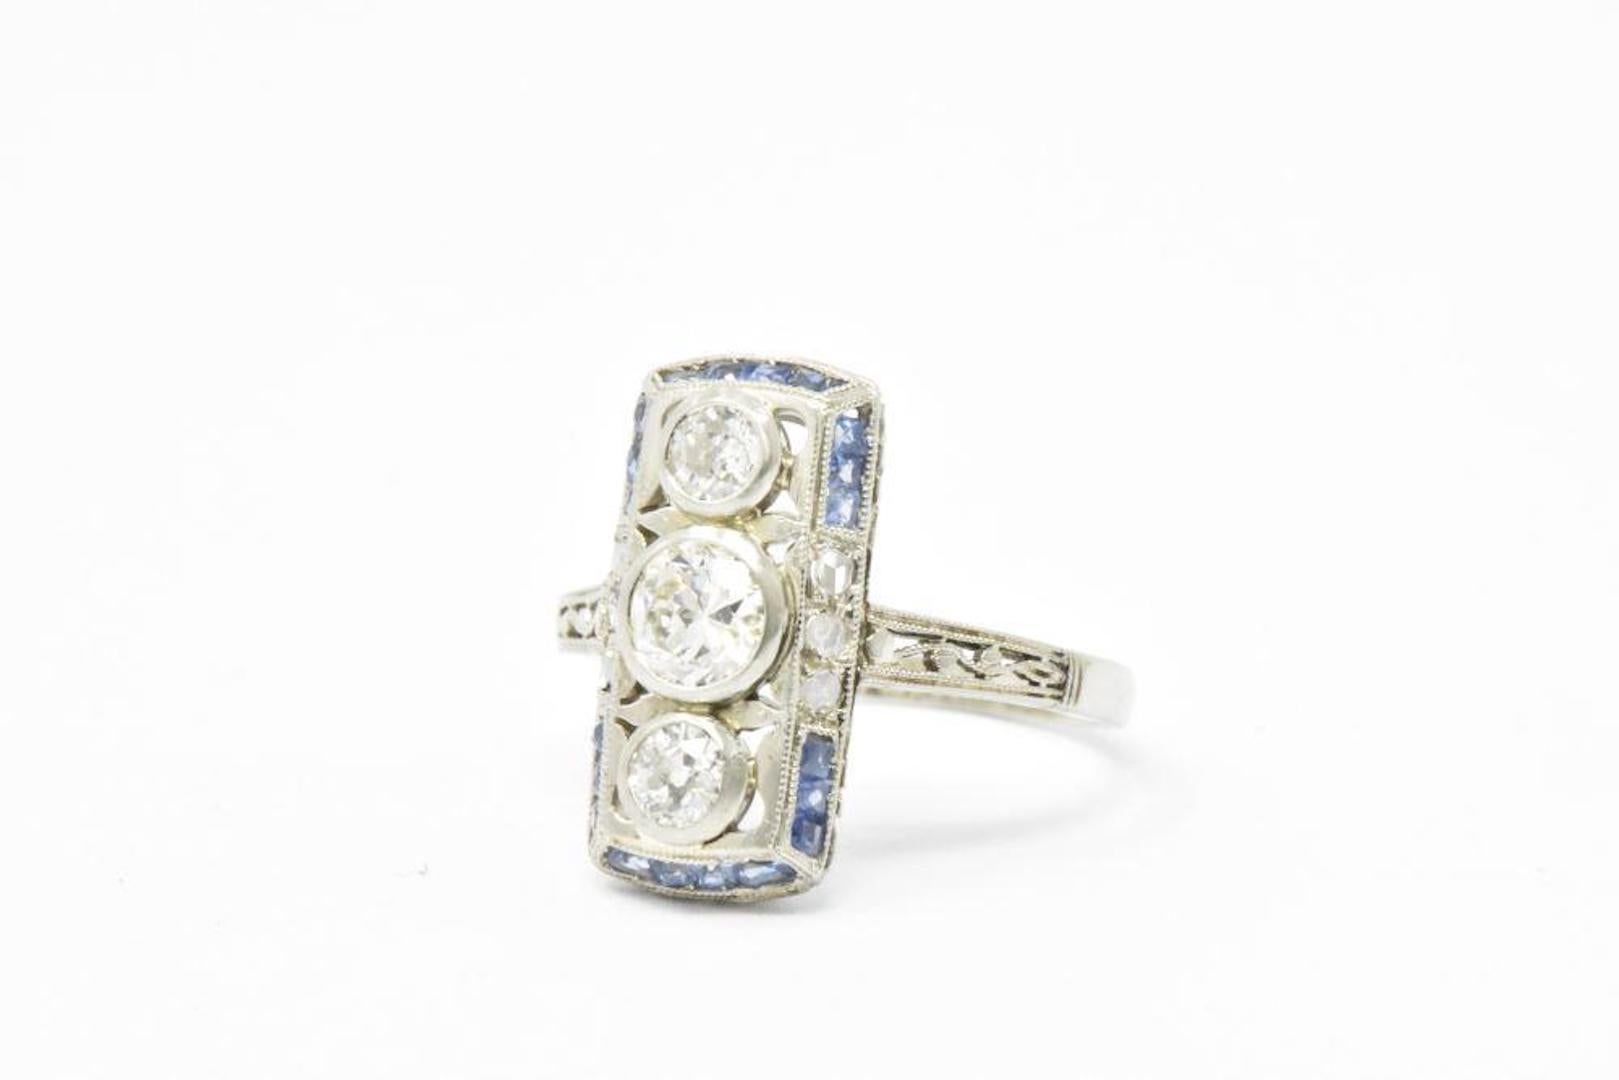 This is a beautiful Art Deco sapphire and diamond ring. This lovely ring is set in 18K white gold. The center old European cut diamonds are bezel set and weighing approximately 0.55 carats total, I/J color and VS clarity. A delicately alternating